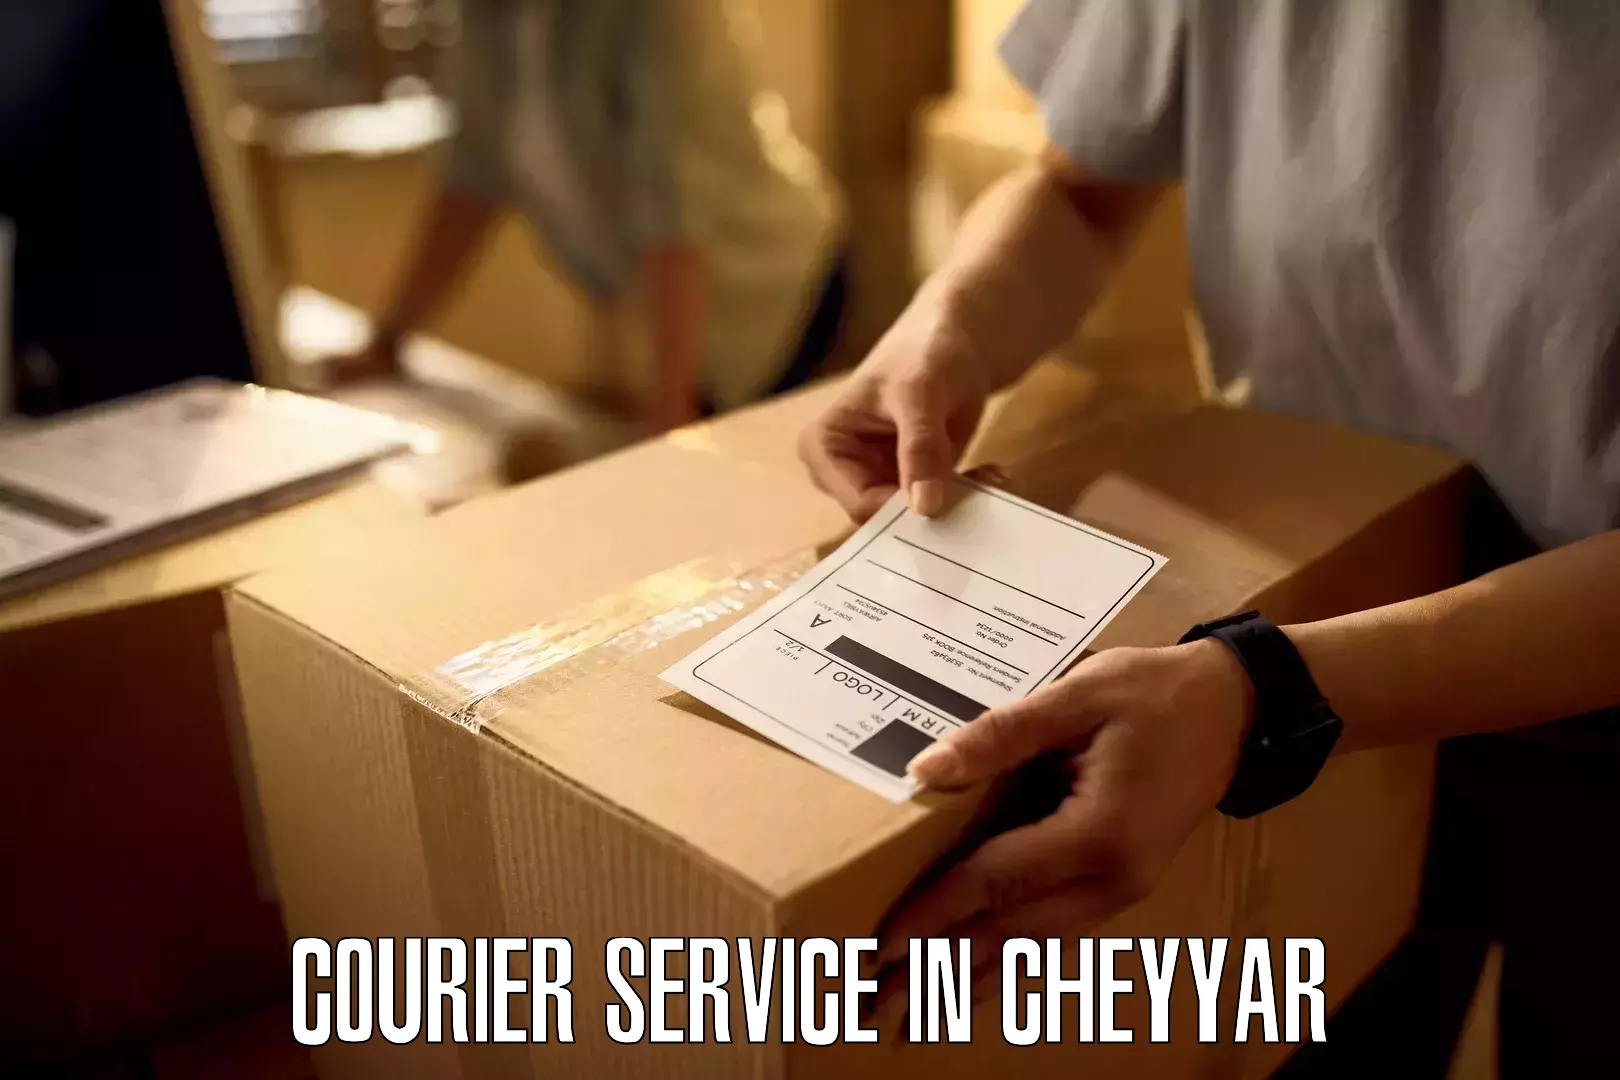 Customer-focused courier in Cheyyar